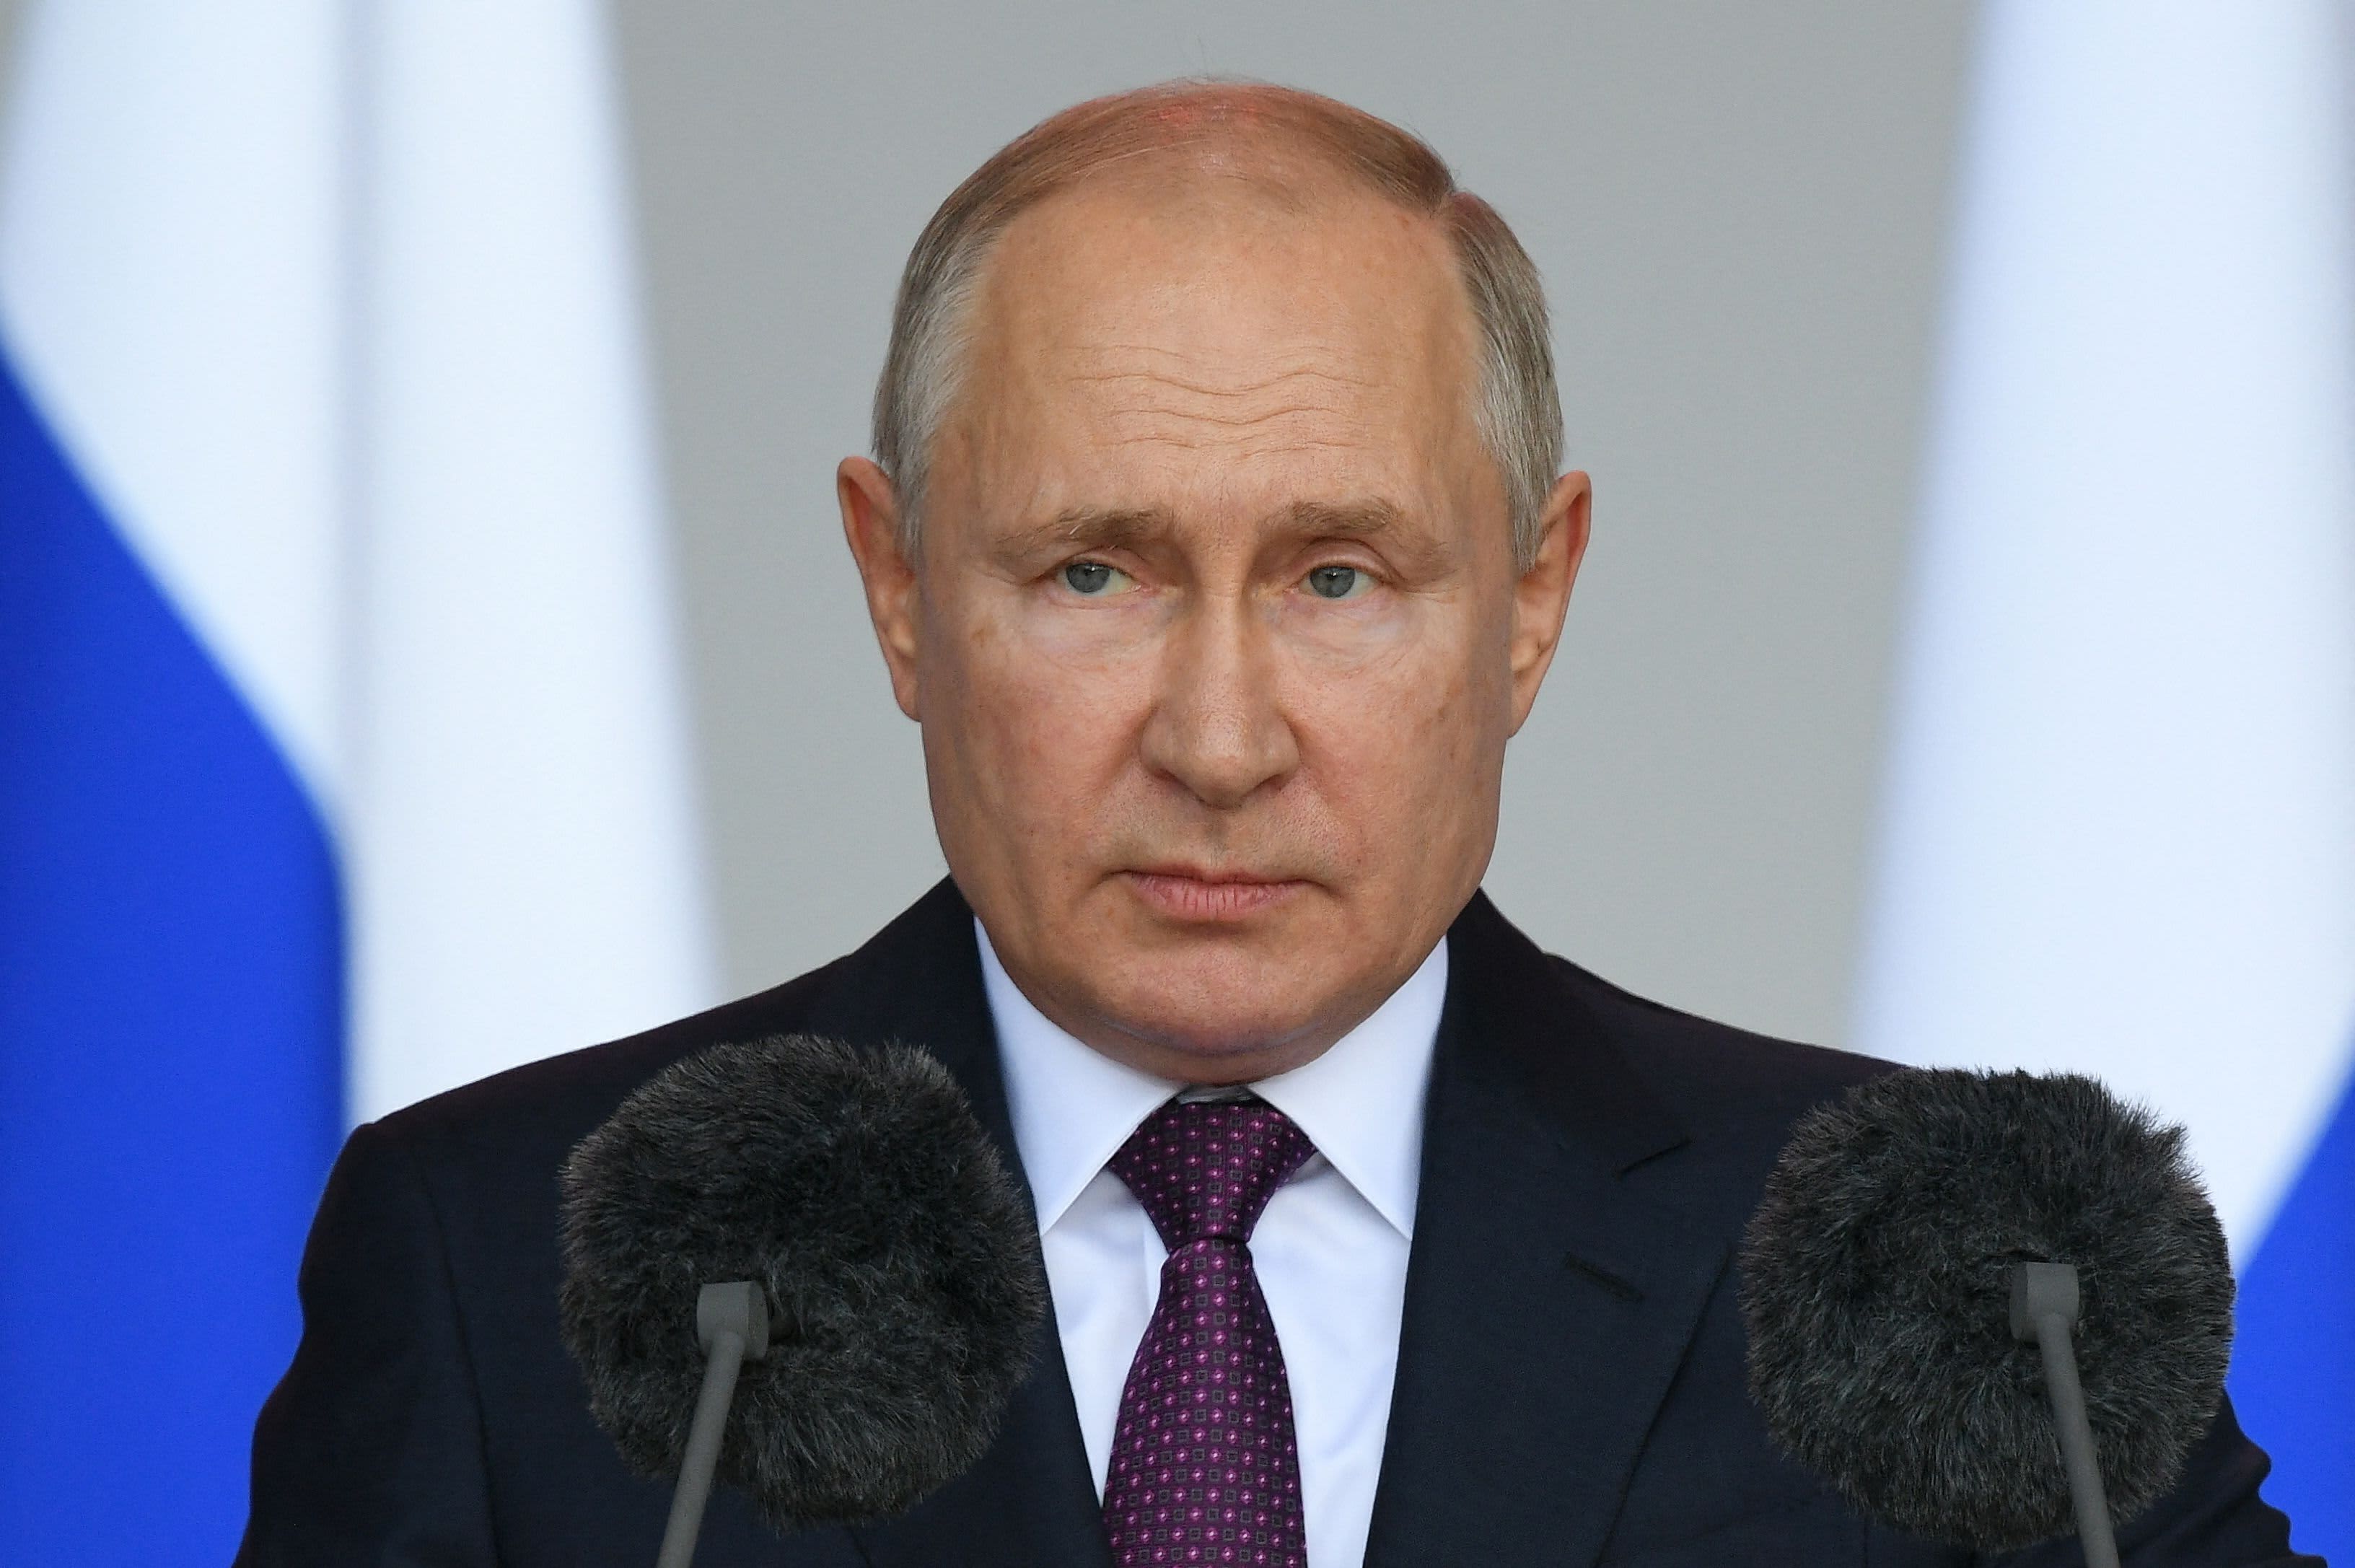 Vladimir Putin is to self-isolate after Covid detected in entourage